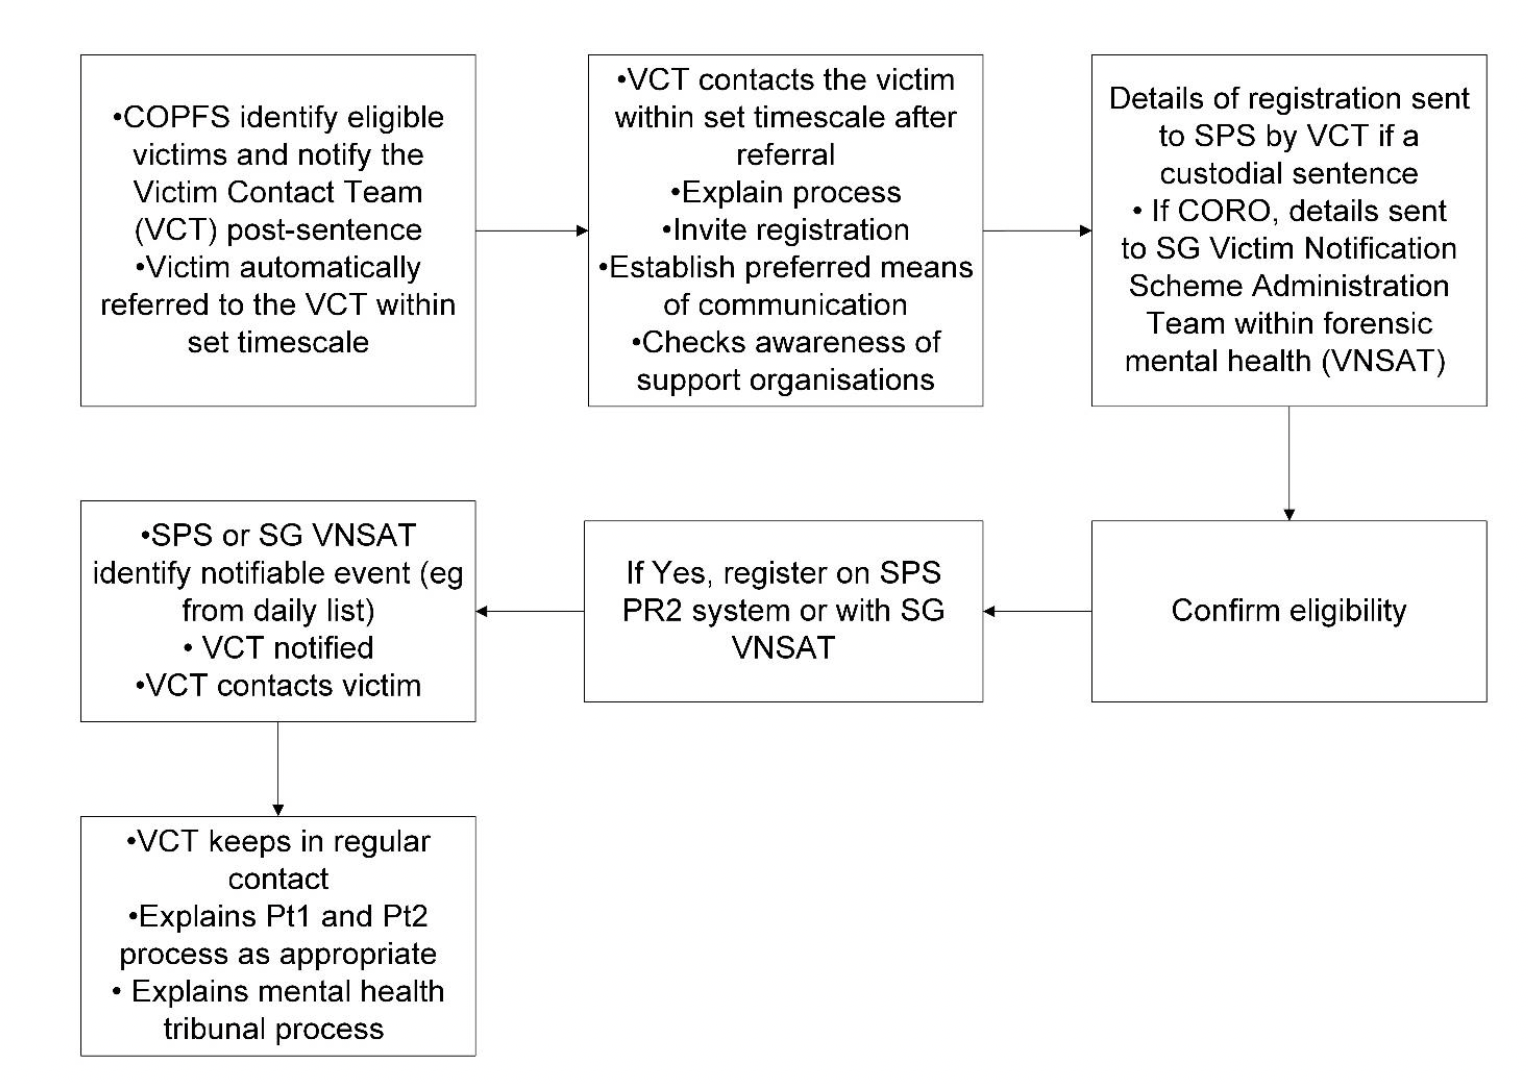 This is a process map for the proposed “to be” VNS for the criminal justice system and forensic mental health system. 
The COPFS will identify eligible victims and notify the Victim Contact Team (VCT) post-sentence. The victim will be automatically referred to the VCT within set timescales. 
The VCT will contact the victim with the set timescale after referral. They will explain the process, invite registration, establish the preferred means of communication and check awareness of support organisations. 
Details of registration will be sent to SPS by the VCT if there is a custodial sentence. If CORO, details will be sent to the SG Victim Notification Scheme Admin Team within forensic mental health (VNSAT). 
Eligibility will then be confirmed. 
If the victim is eligible, they will be registered on the SPS PR2 system or with SG VNSAT. 
SPS or SGVNSAT will identify notifiable events (e.g. from the daily list). The VCT will be notified and will contact the victim. 
The VCT will keep in regular contact with the victim. It will explain Part 1 and Part 2 of the VNS as appropriate, and mental health tribunal processes.
